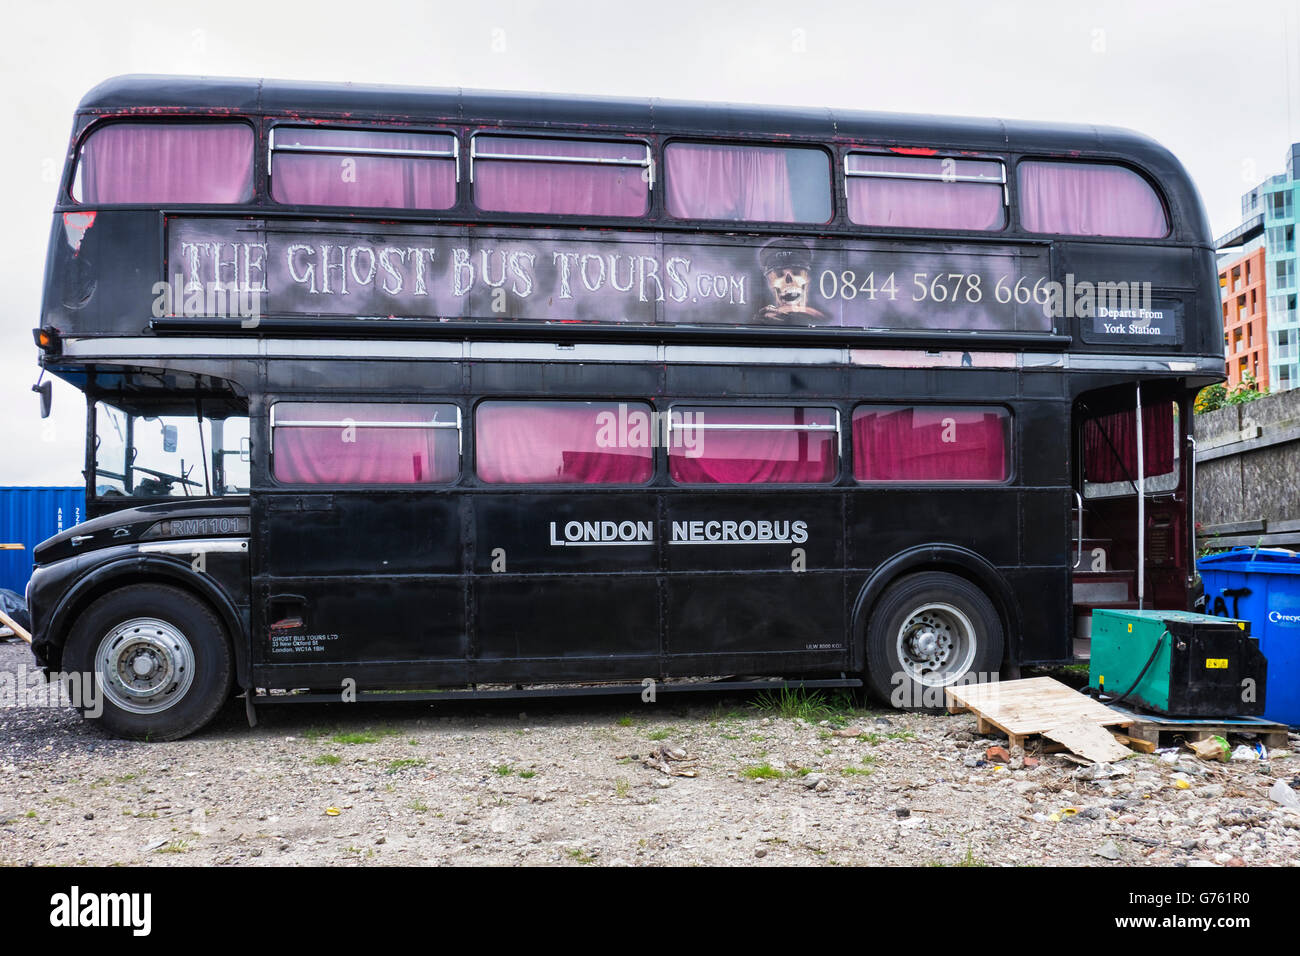 London Necrobus - Old routemaster bus painted black & used for 'Ghost tours' Stock Photo